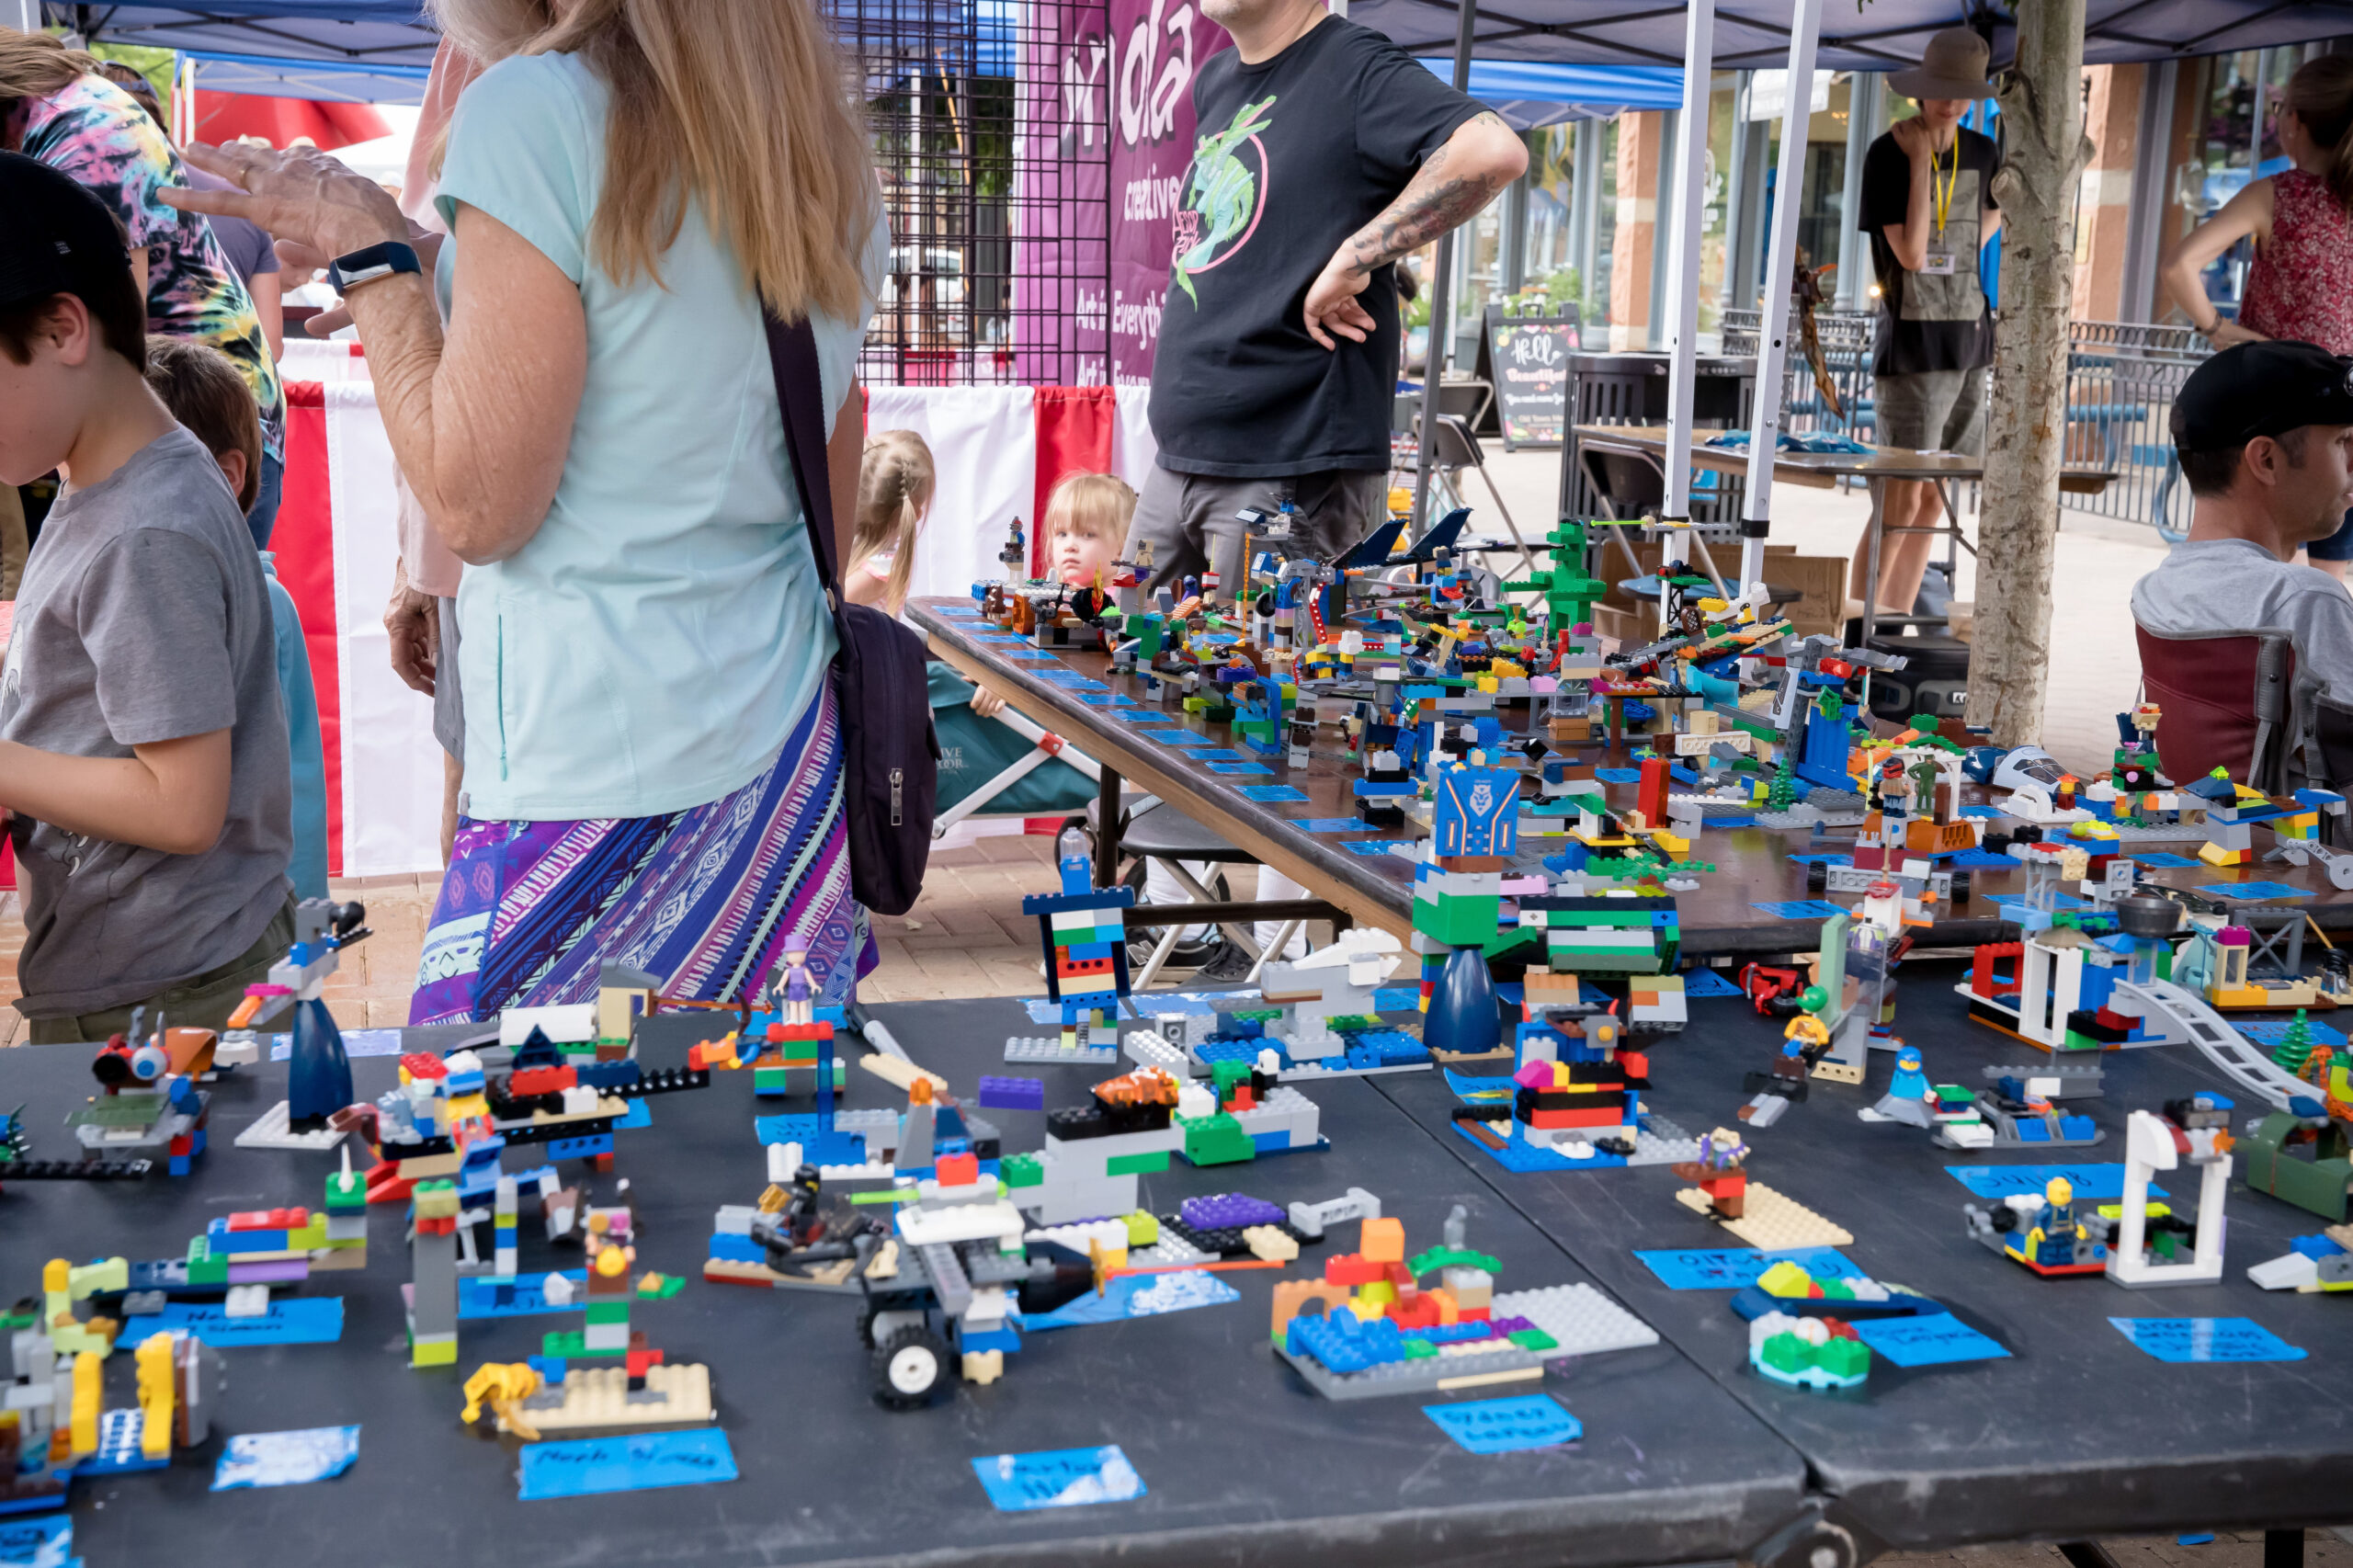 Lots of smaller LEGO® creations